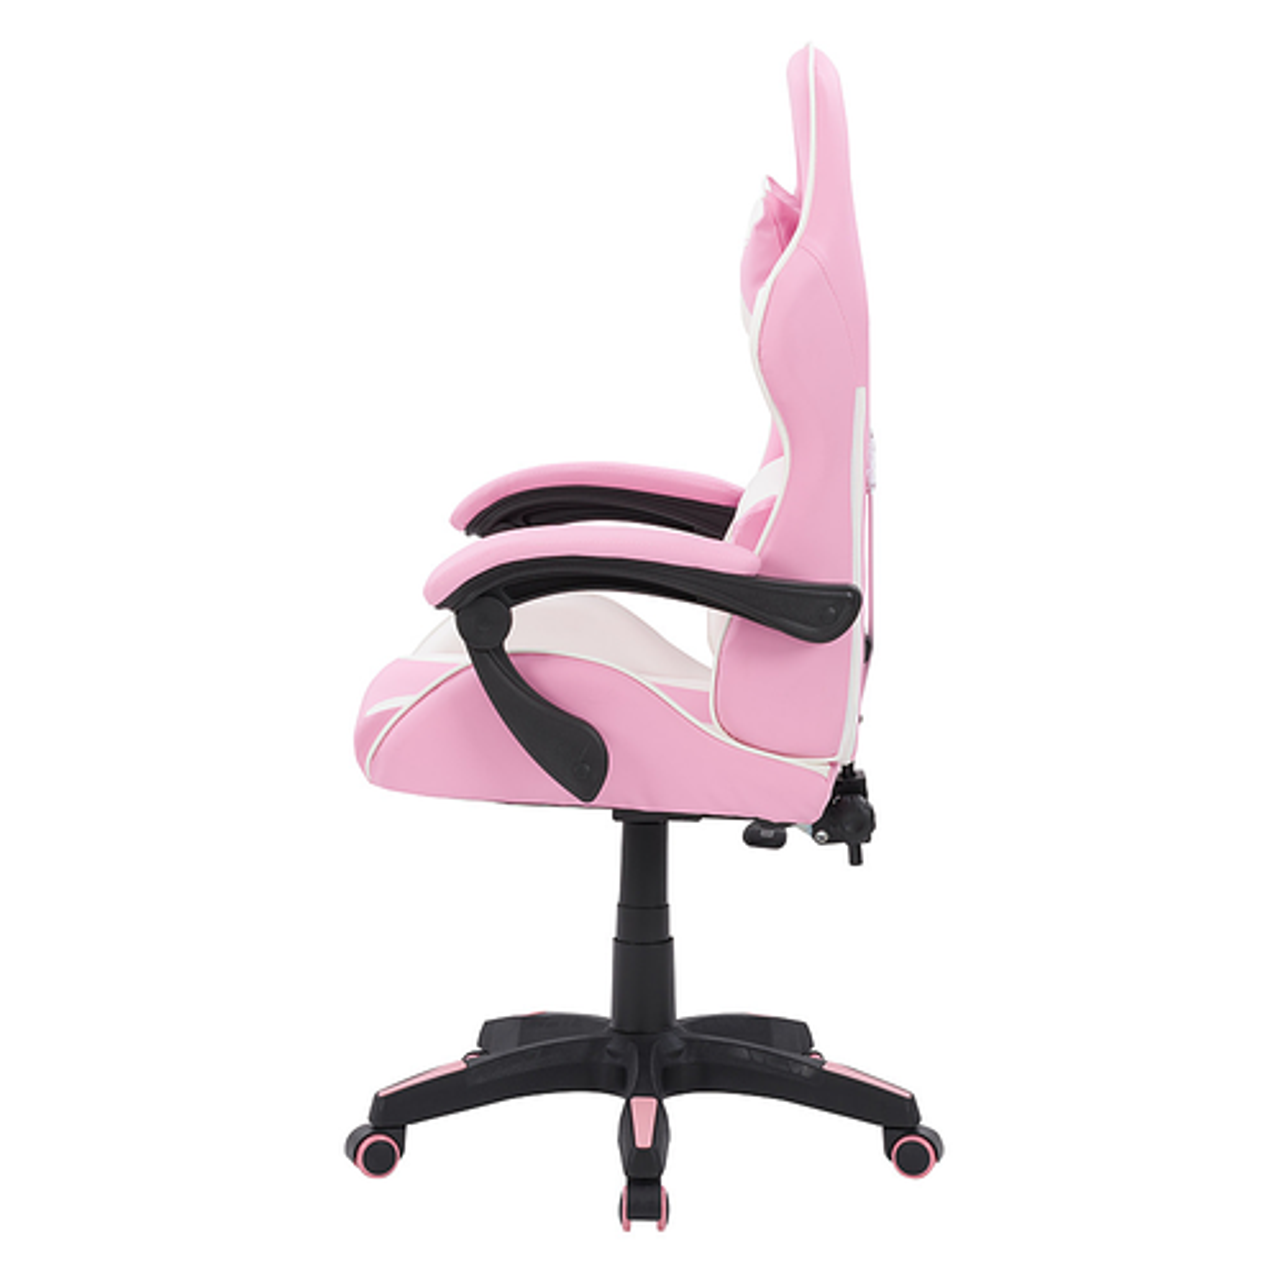 CorLiving Ravagers Gaming Chair in - Pink and White